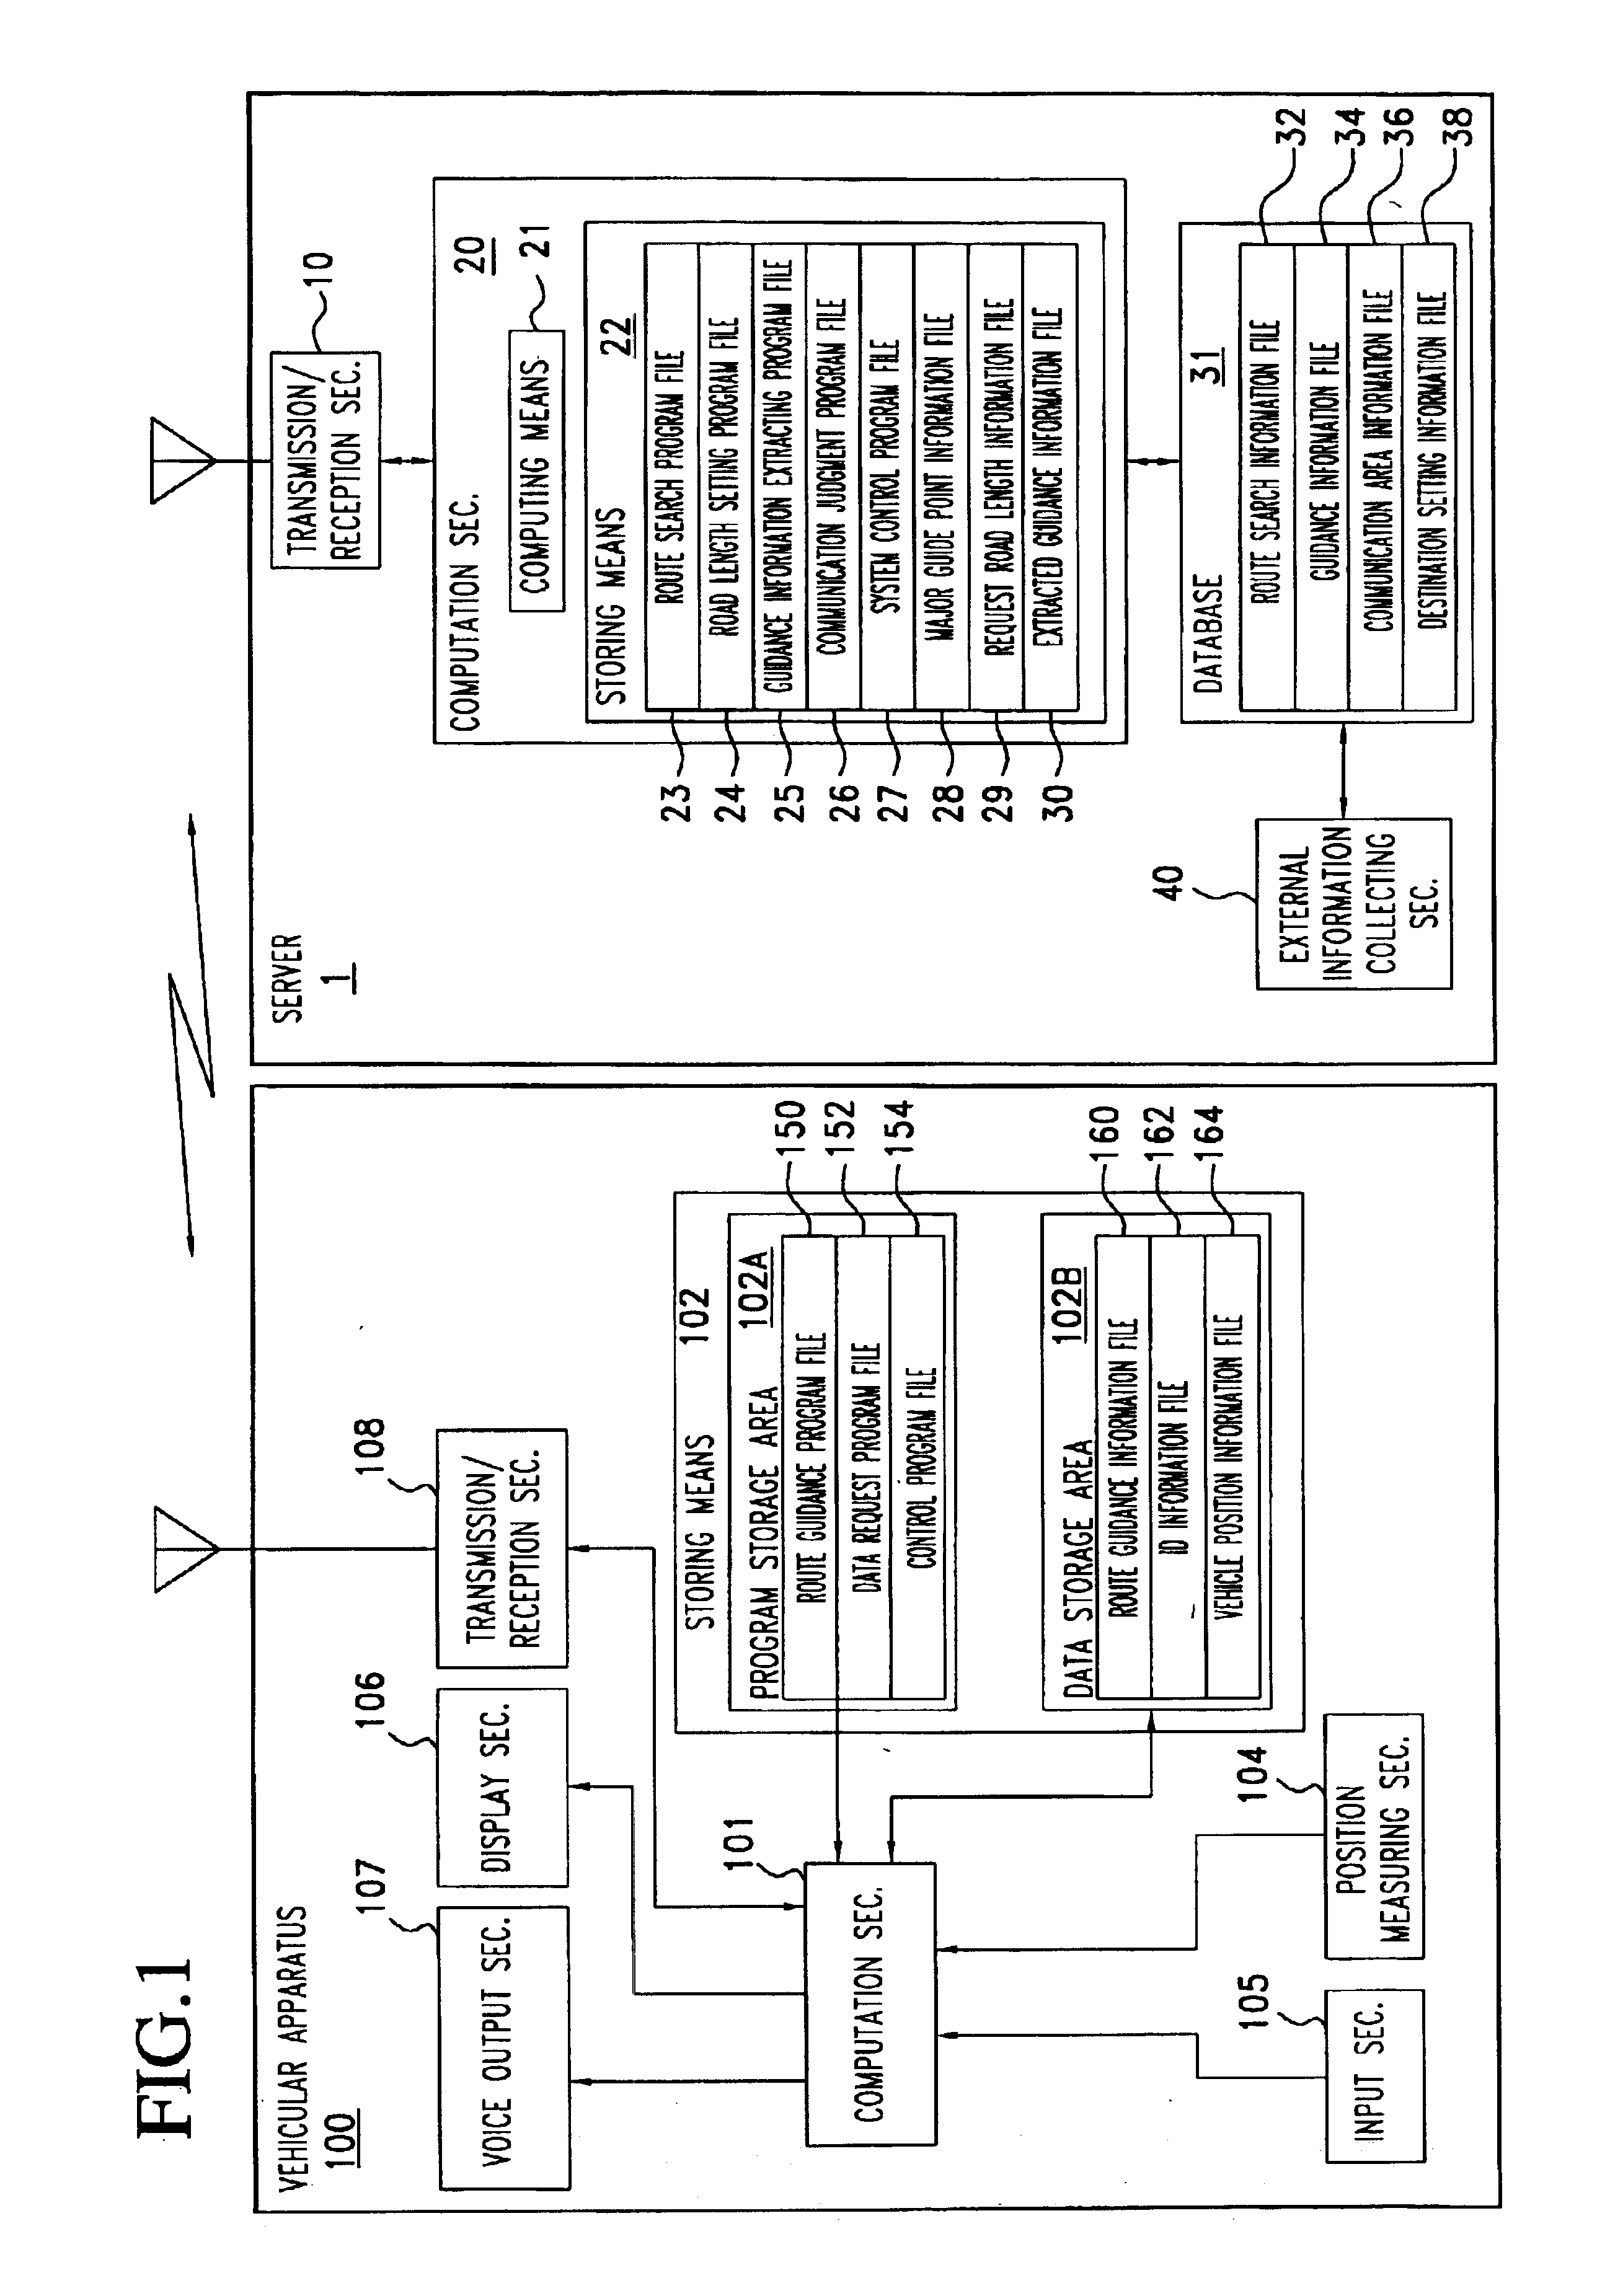 Route guidance system, information delivery center, and vehicular route guidance apparatus